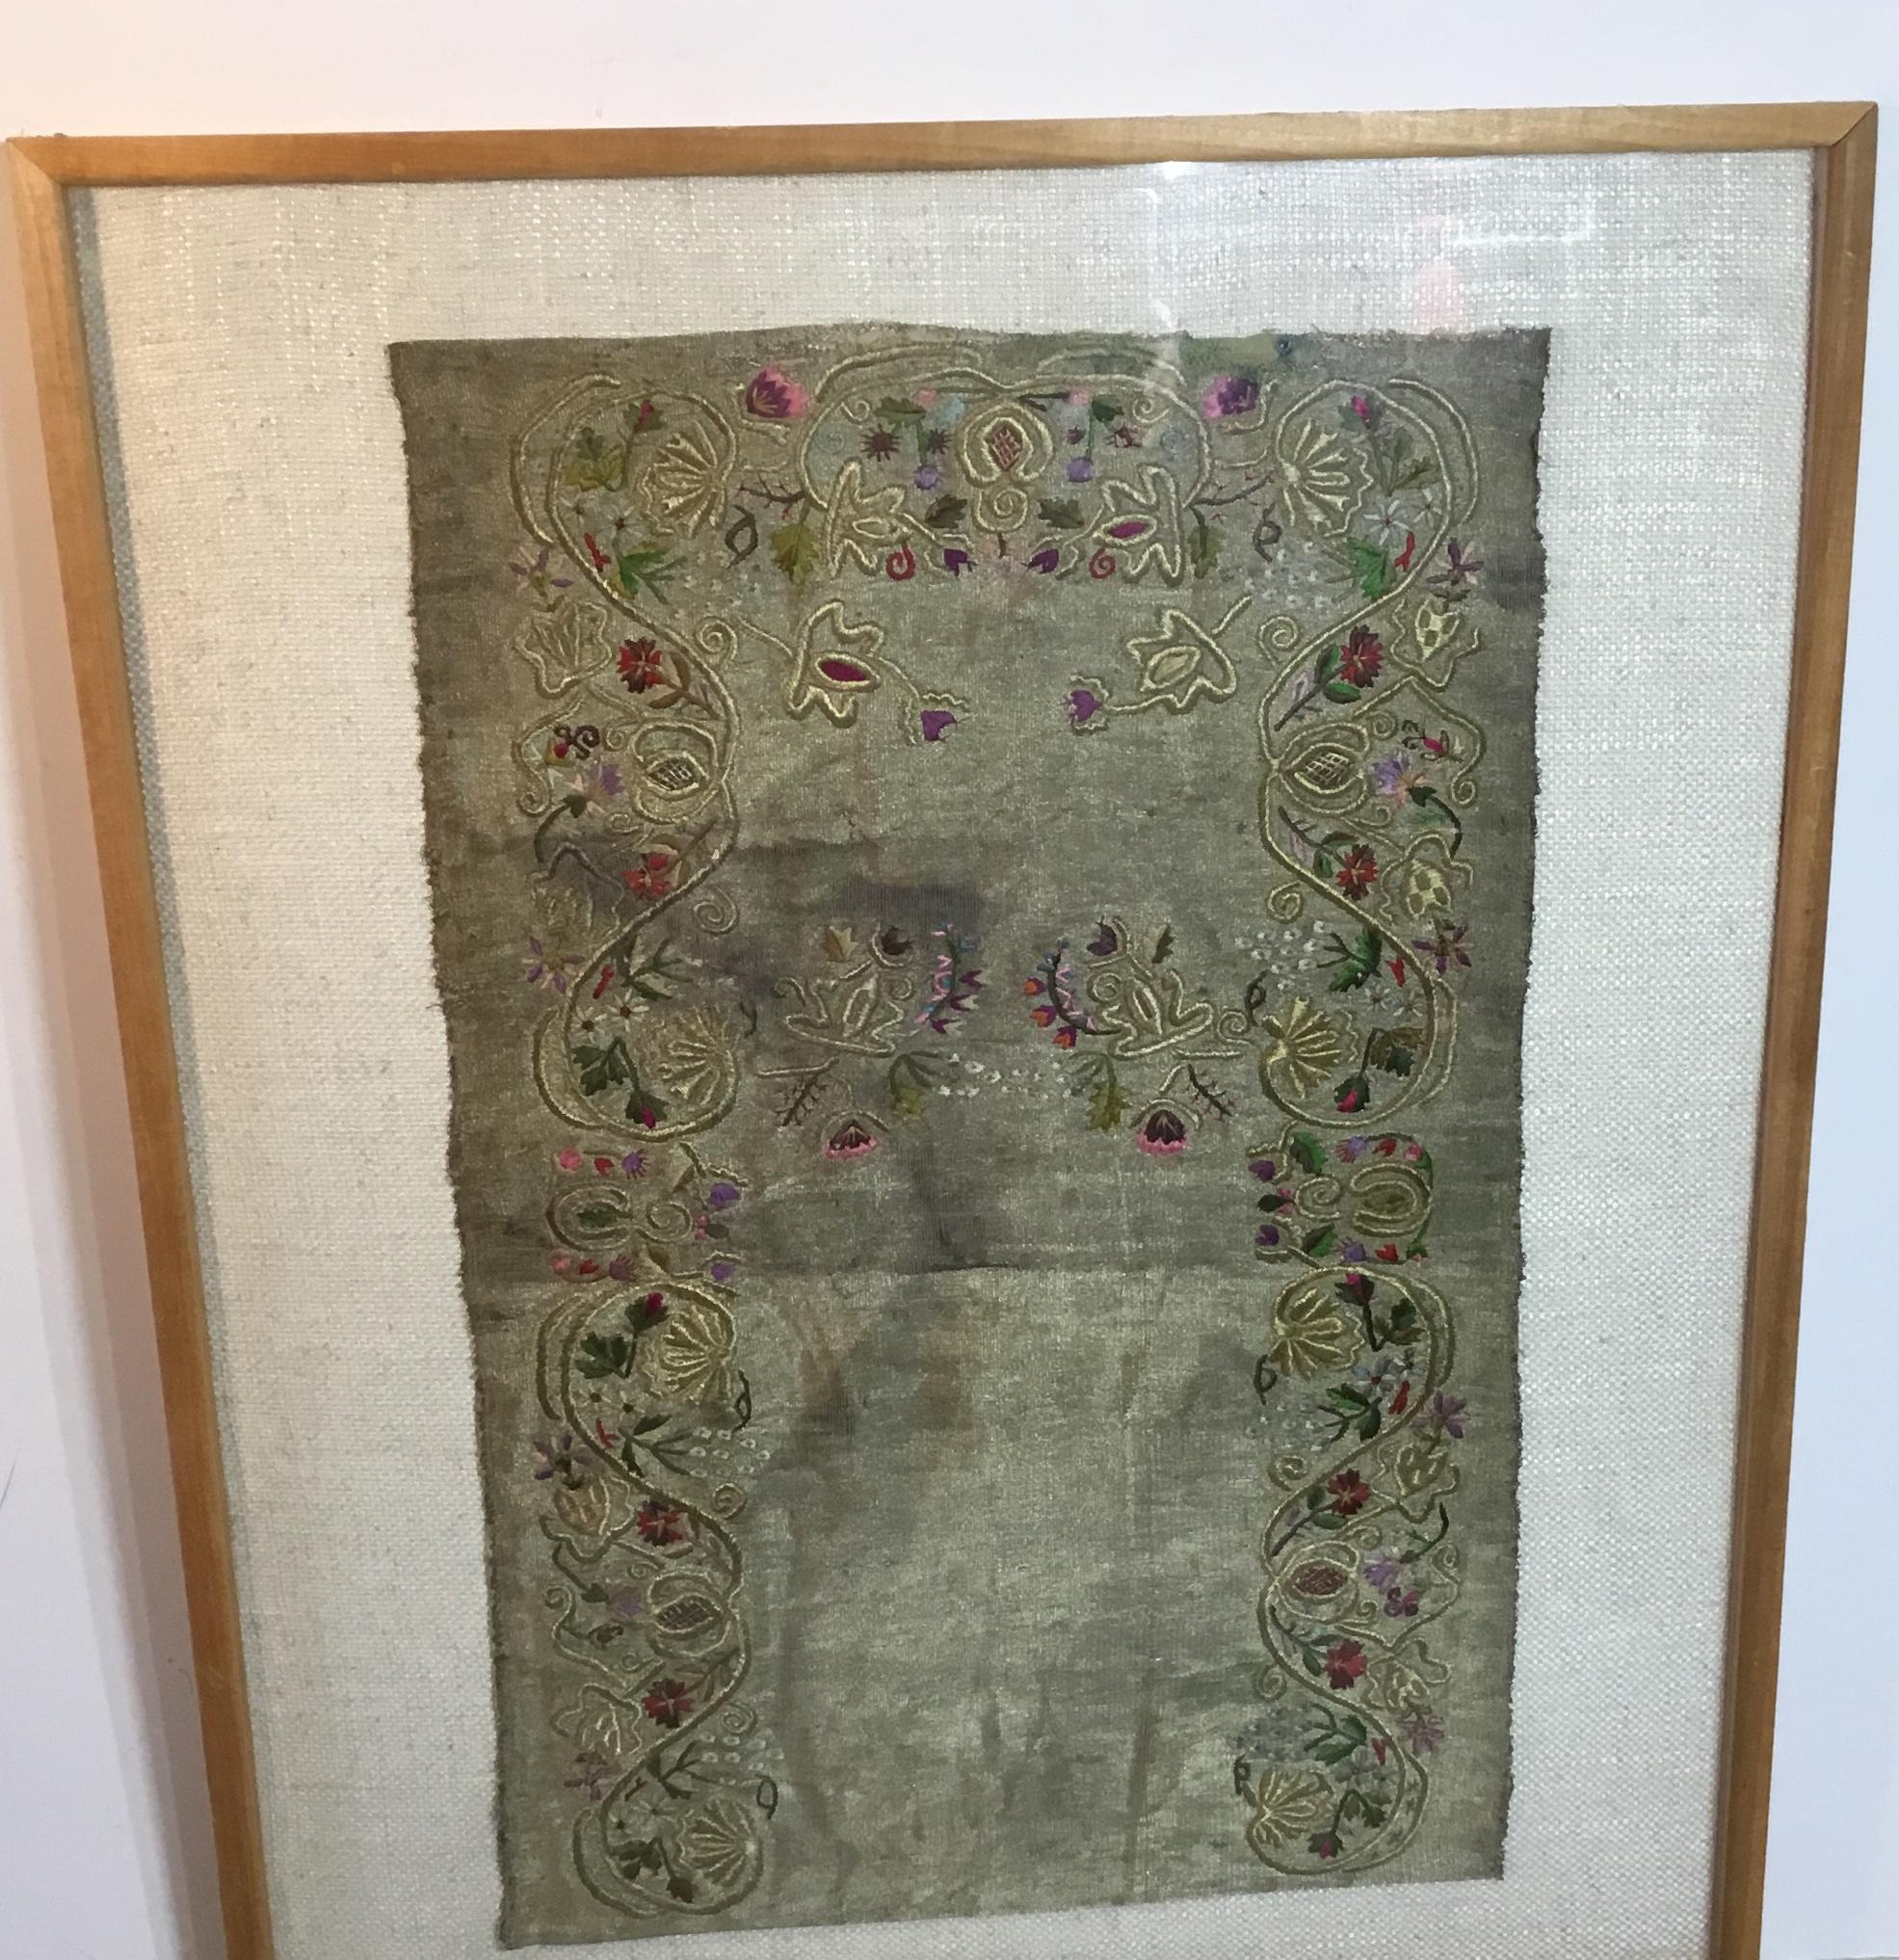 Exquisite Turkish ottoman era embroidery rug made of silk embroidery on metal background, could be some silver, beautiful patterns of flower and vines from the late 19 century.
Professionally mounted and hand sewn to cream color backing all in very